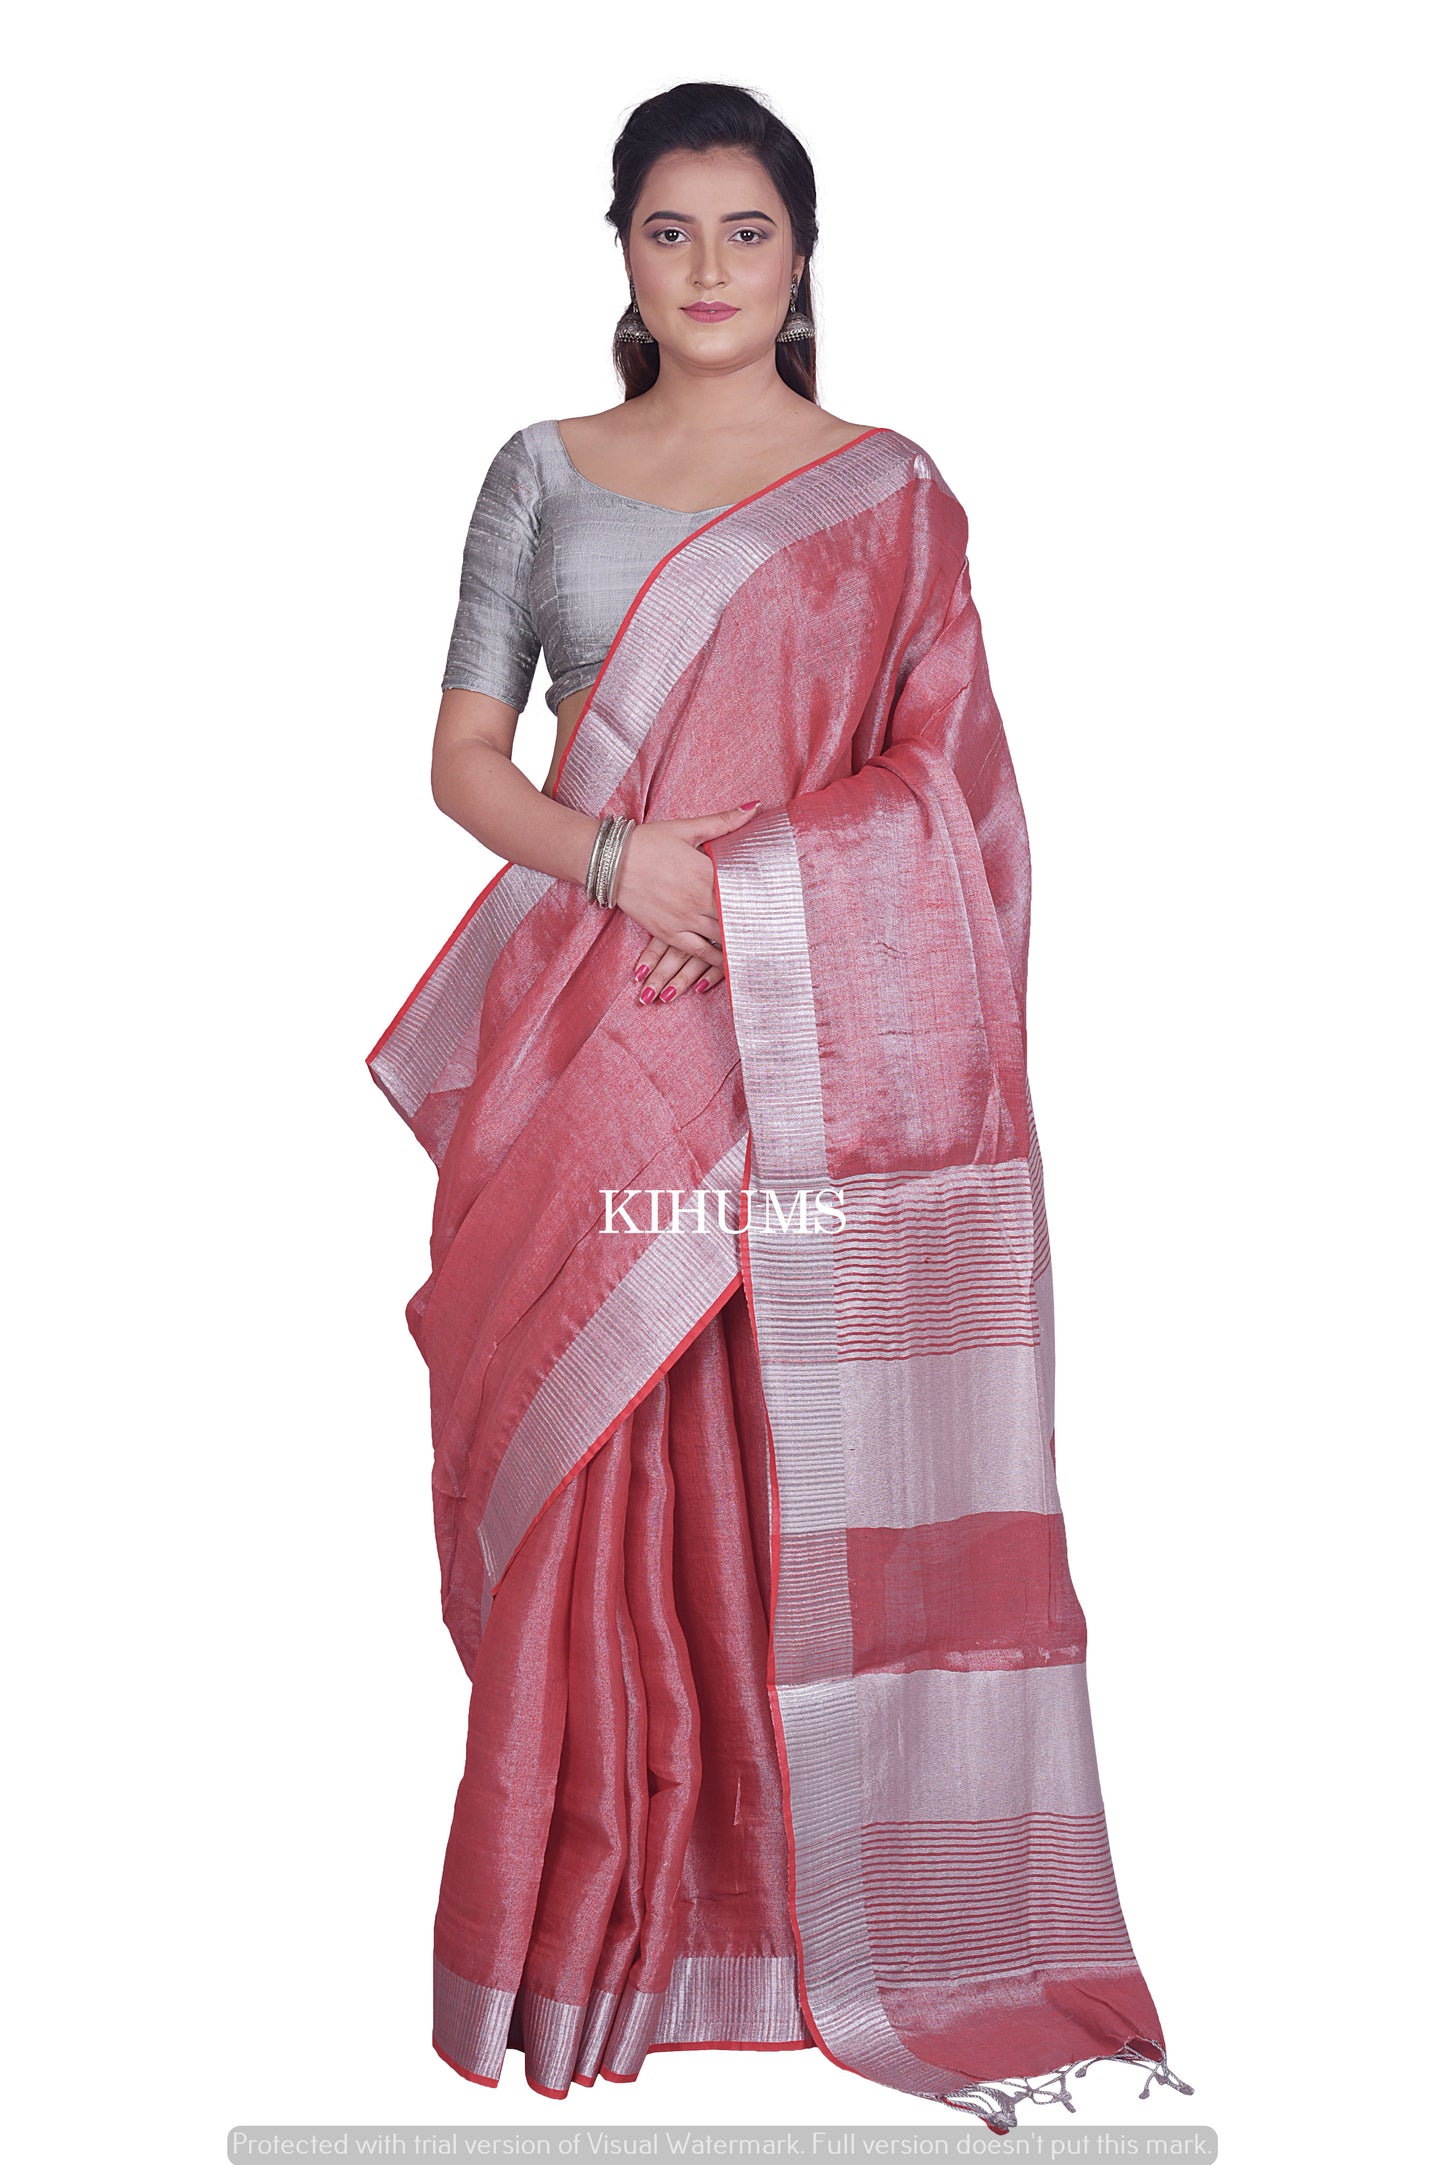 Dusty Red with Silver Tinge | Tissue Linen Saree | KIHUMS Saree